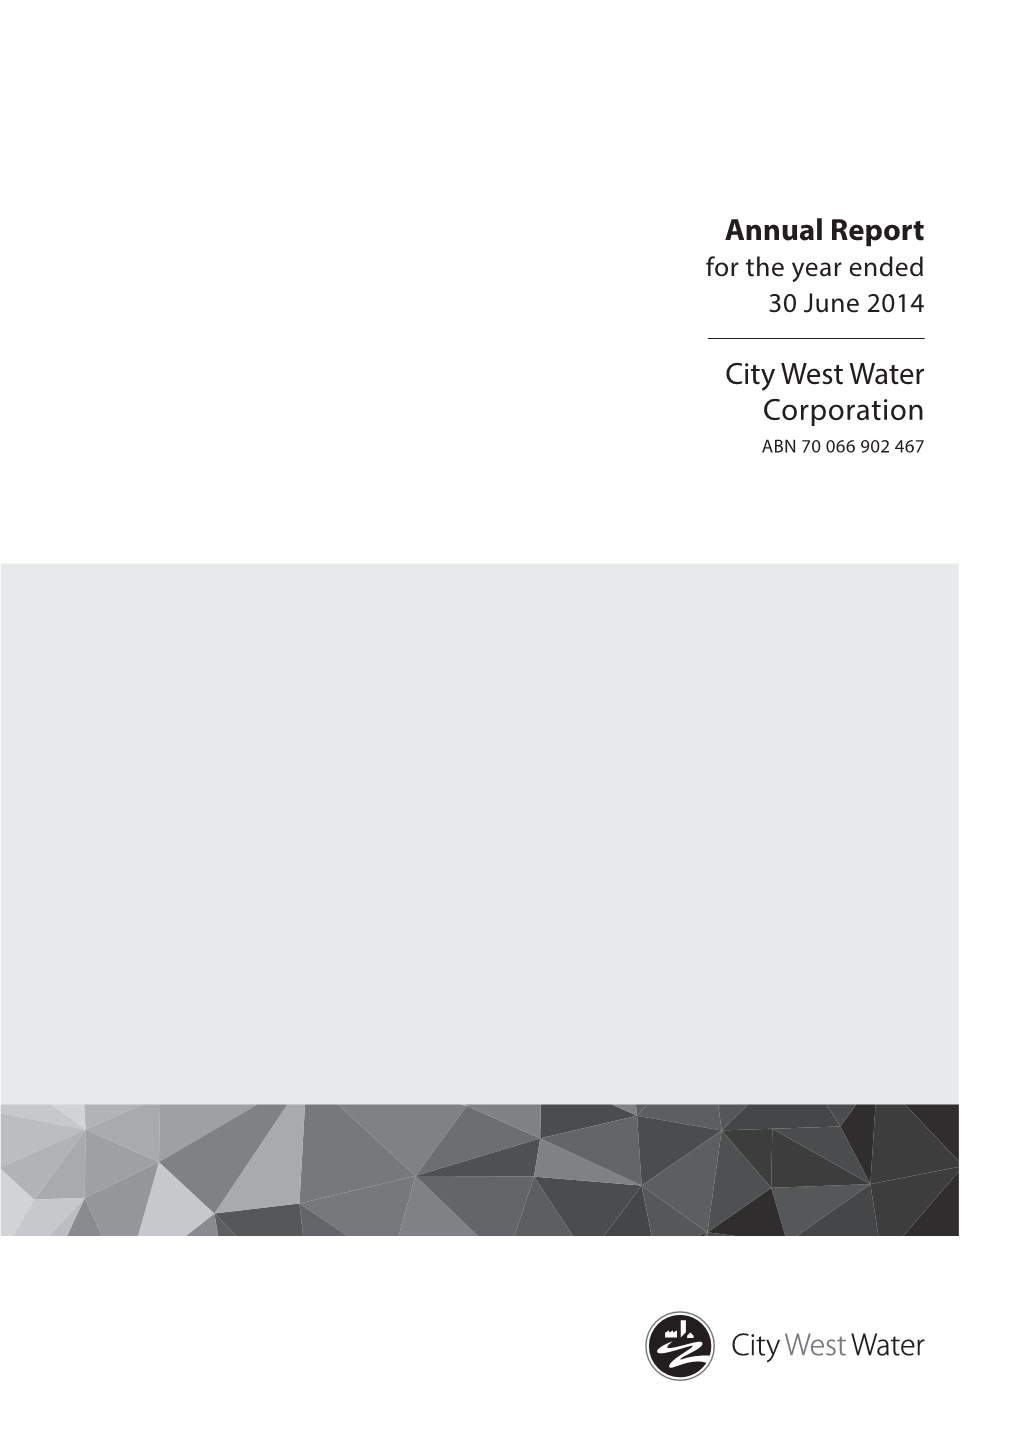 Annual Report City West Water Corporation